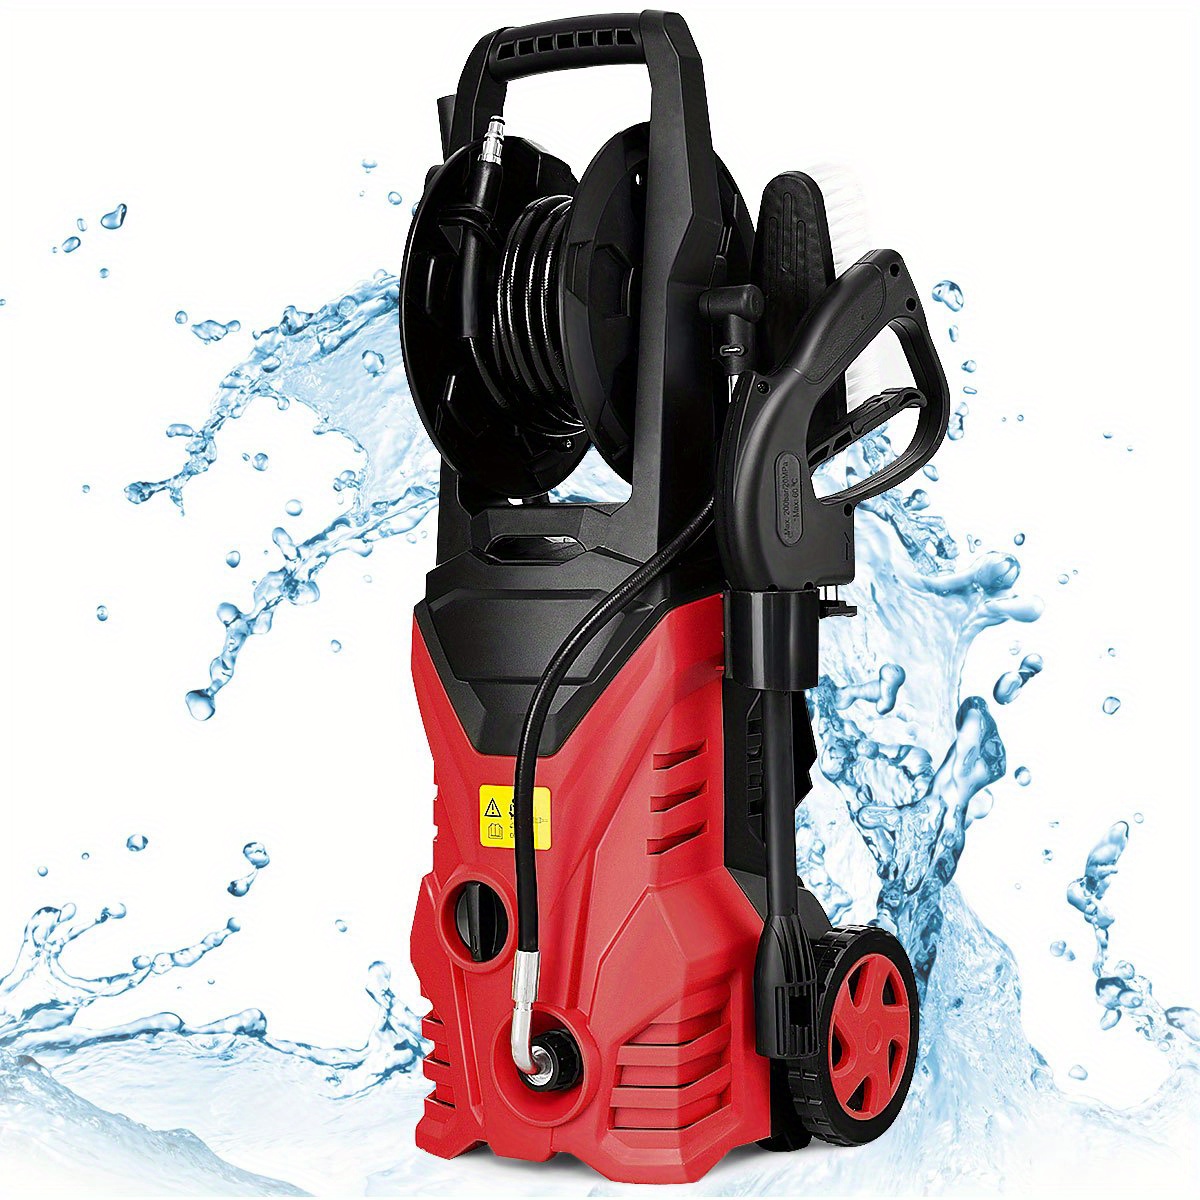 

Lifezeal 2030psi Electric Pressure Washer Cleaner 1.7 Gpm 1800w W/ Hose Reel Red